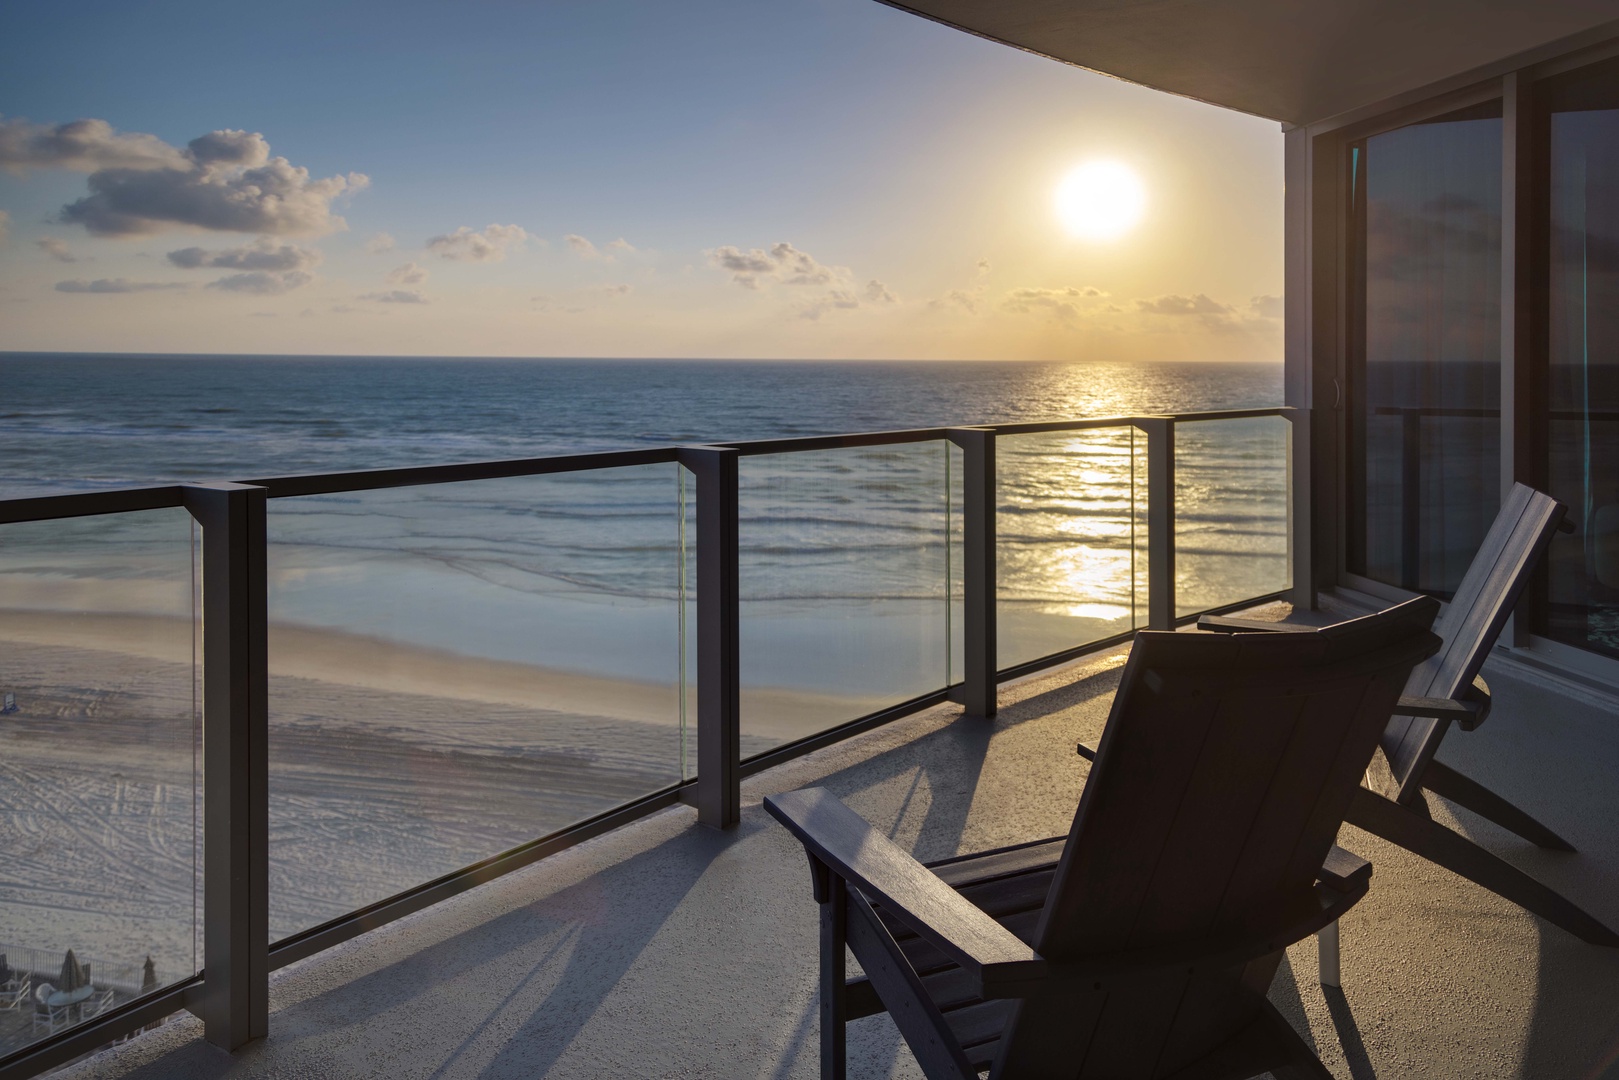 Where Sun Meets Sea: Revel in the Beauty of the Ocean on Your Balcony